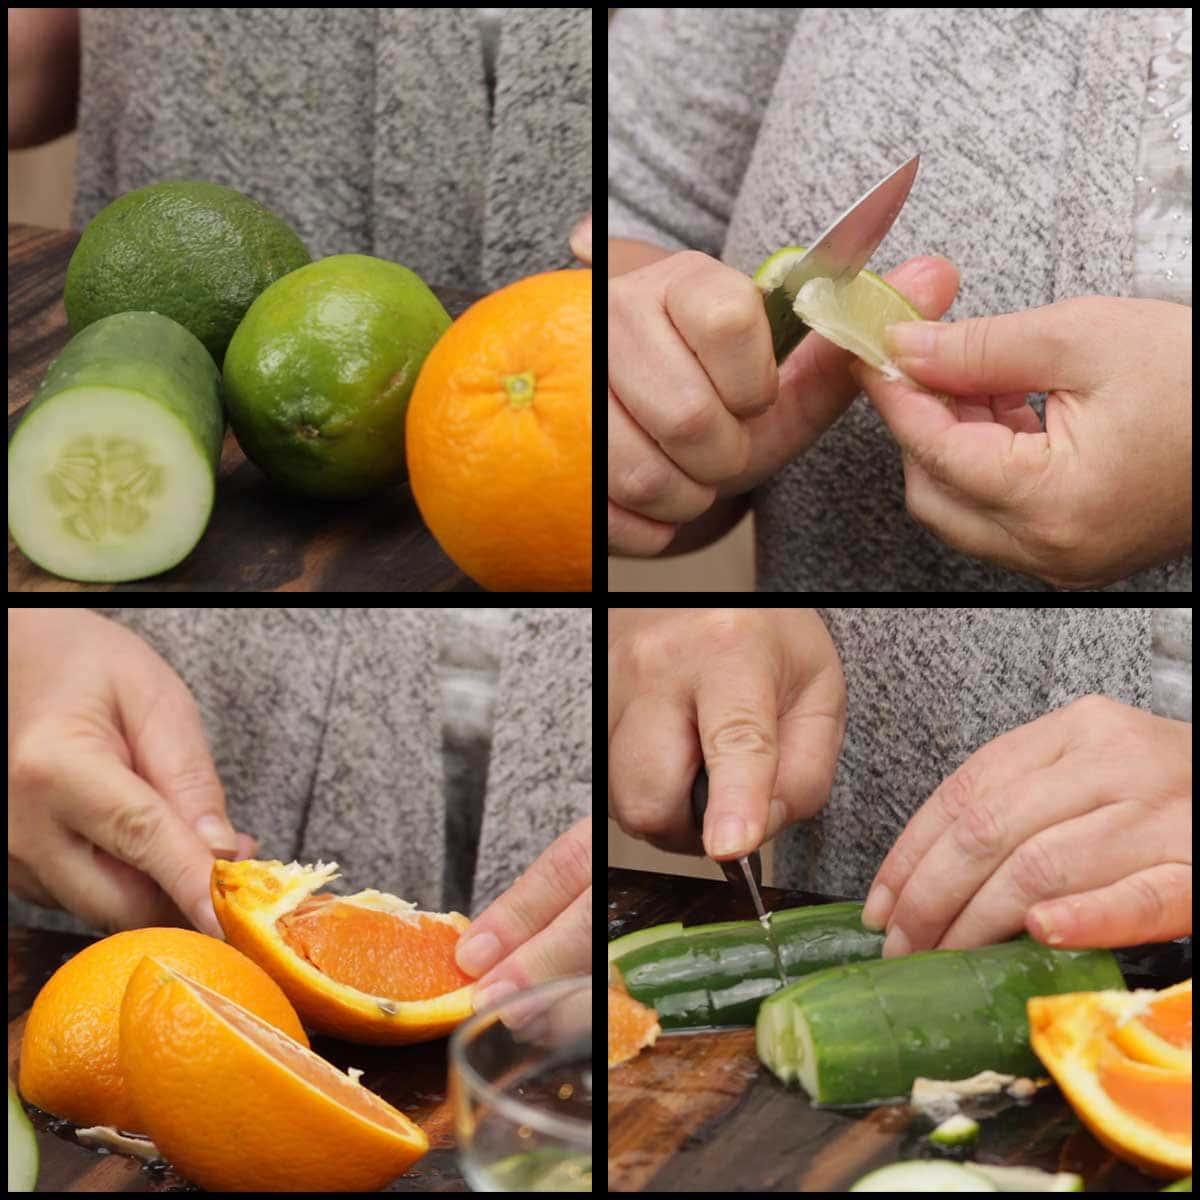 removing the peel from the limes and orange before adding to blender